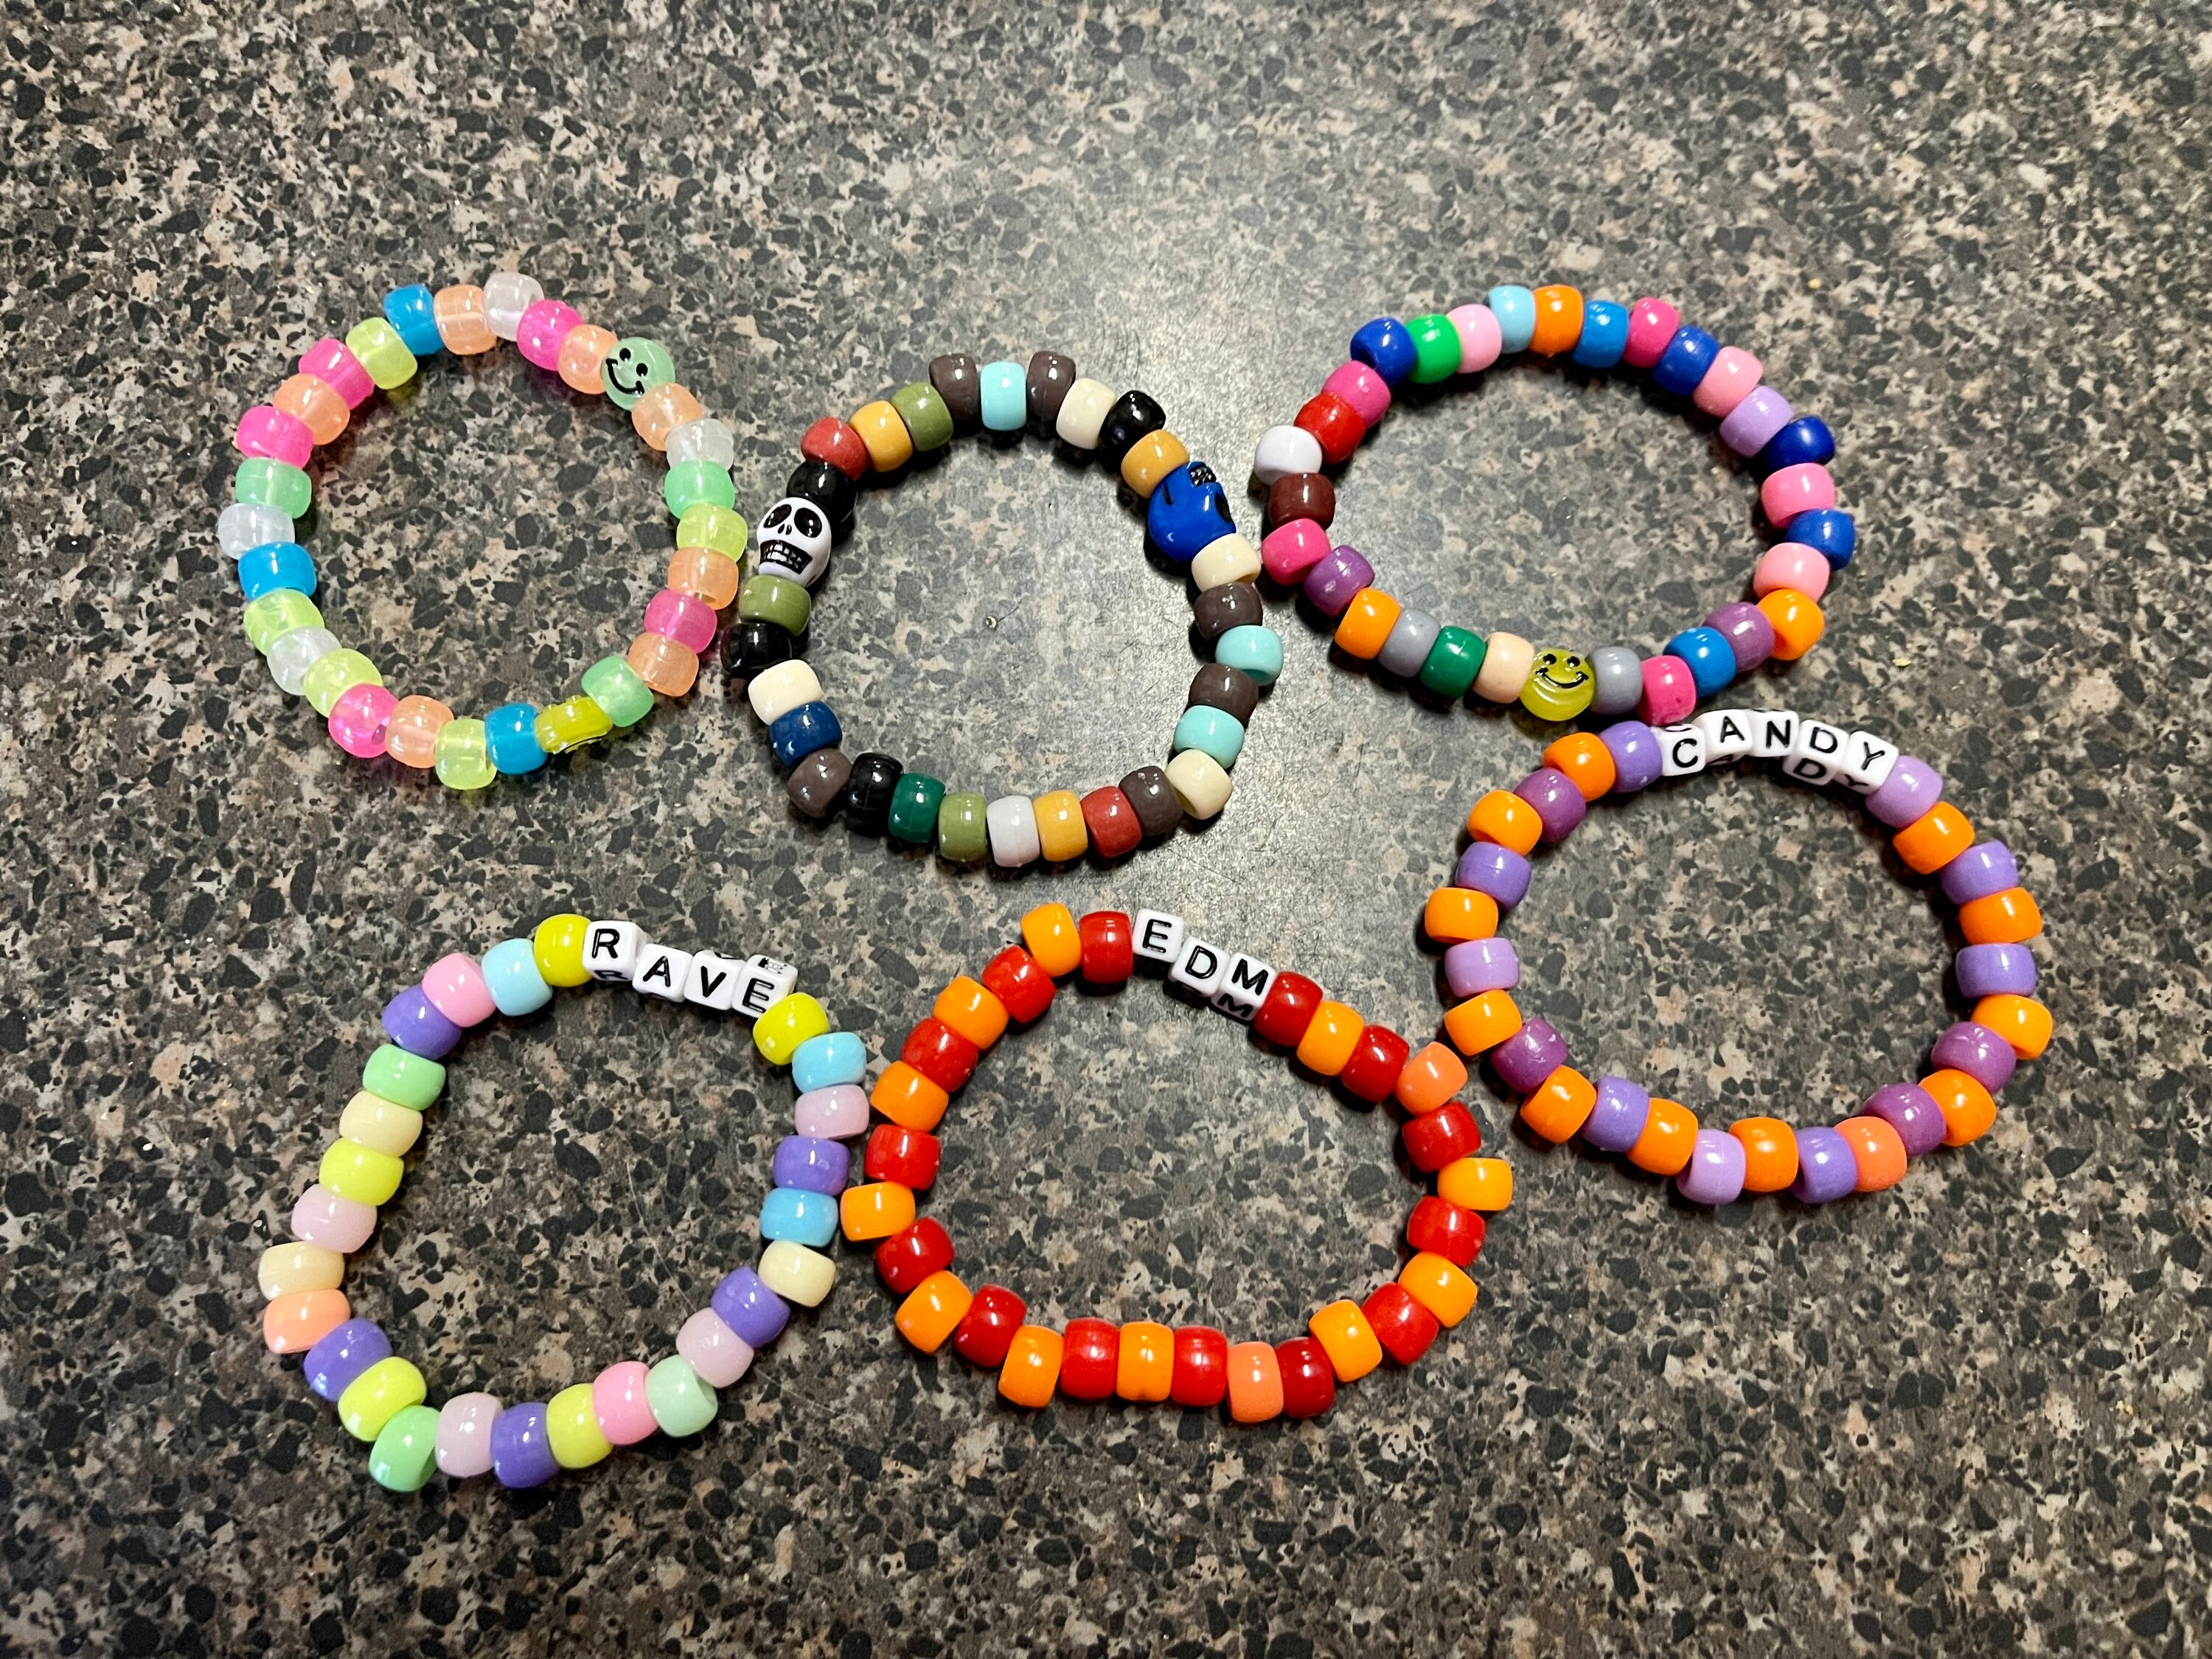 Set of Two Kandi Rave Bracelets “Dream” and “Peace” - $10 - From A Little